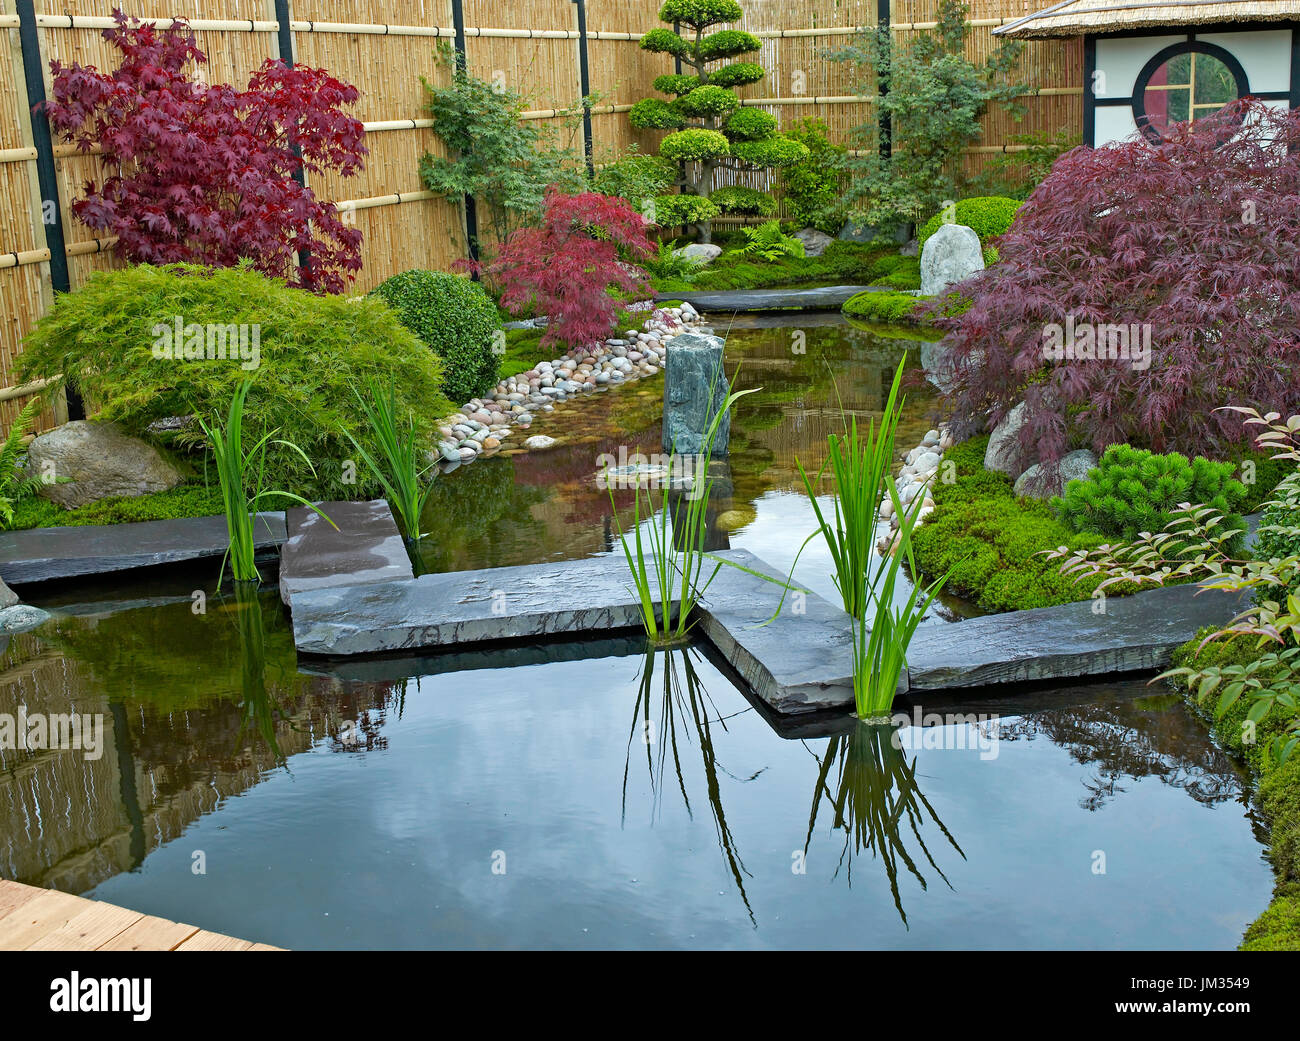 Garden in the style of a Japanese Tea Garden with traditional planting Stock Photo